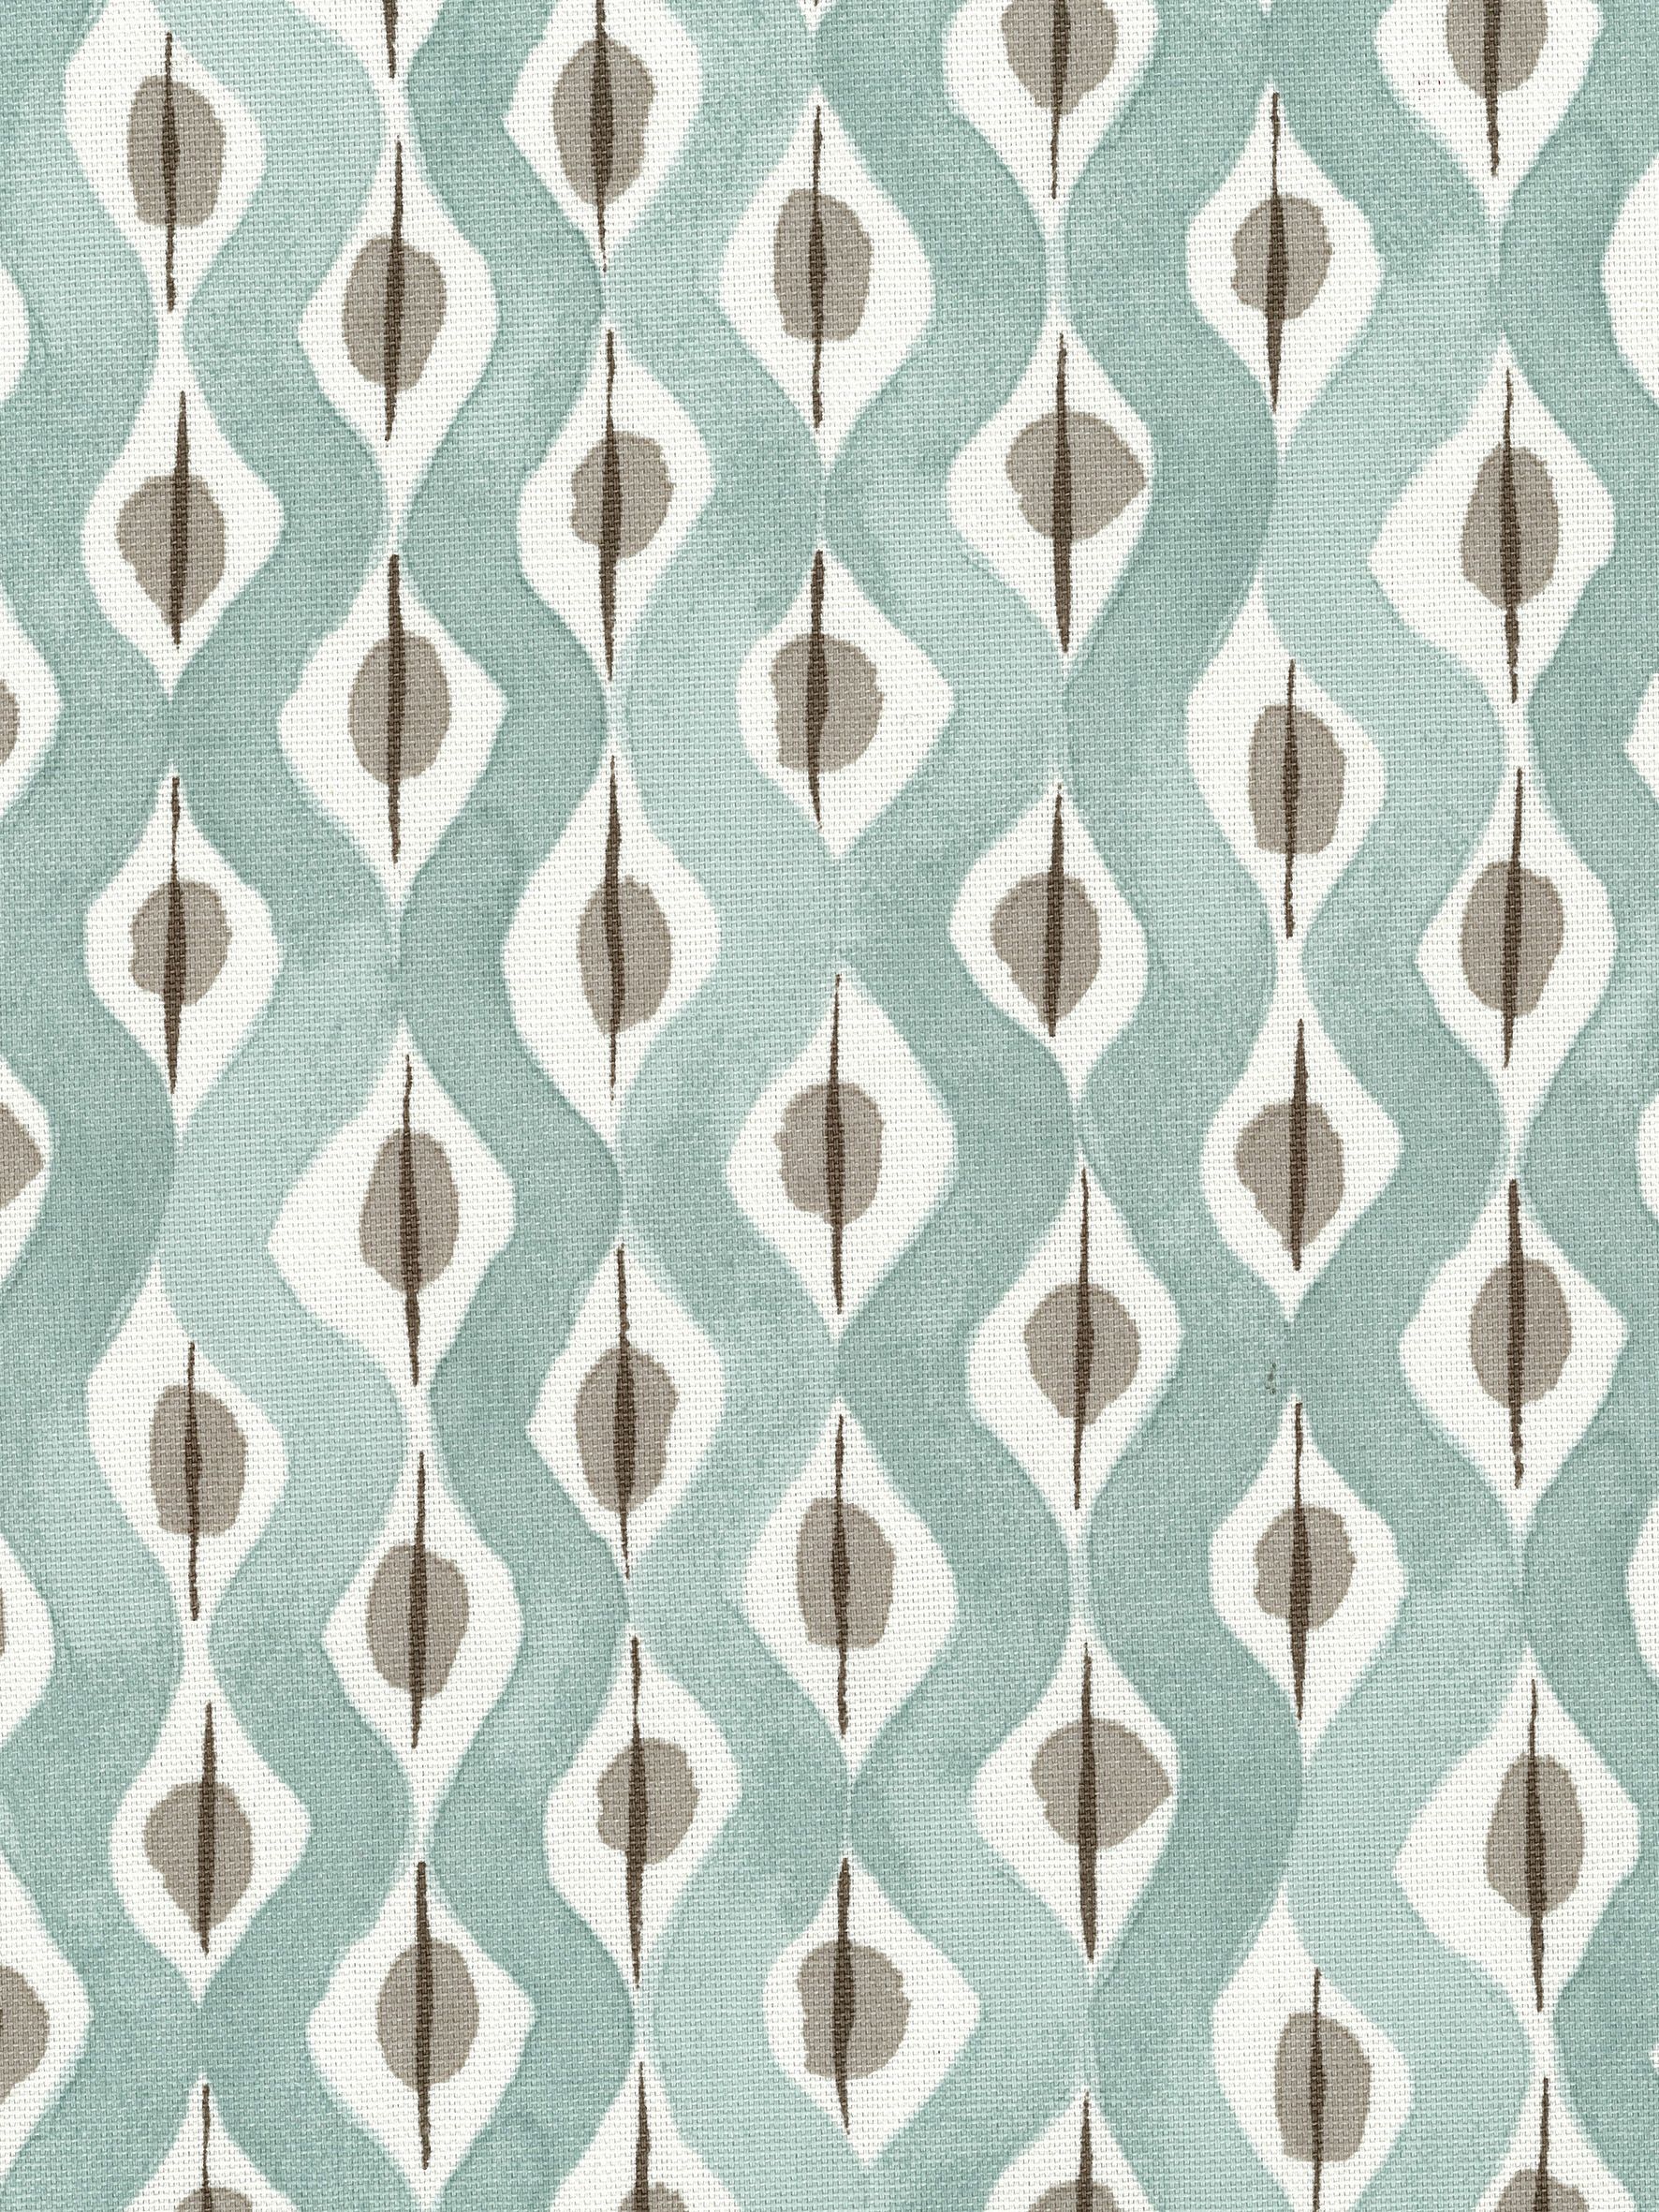 Nina Campbell Beau Rivage Furnishing Fabric, Duck Egg/Taupe